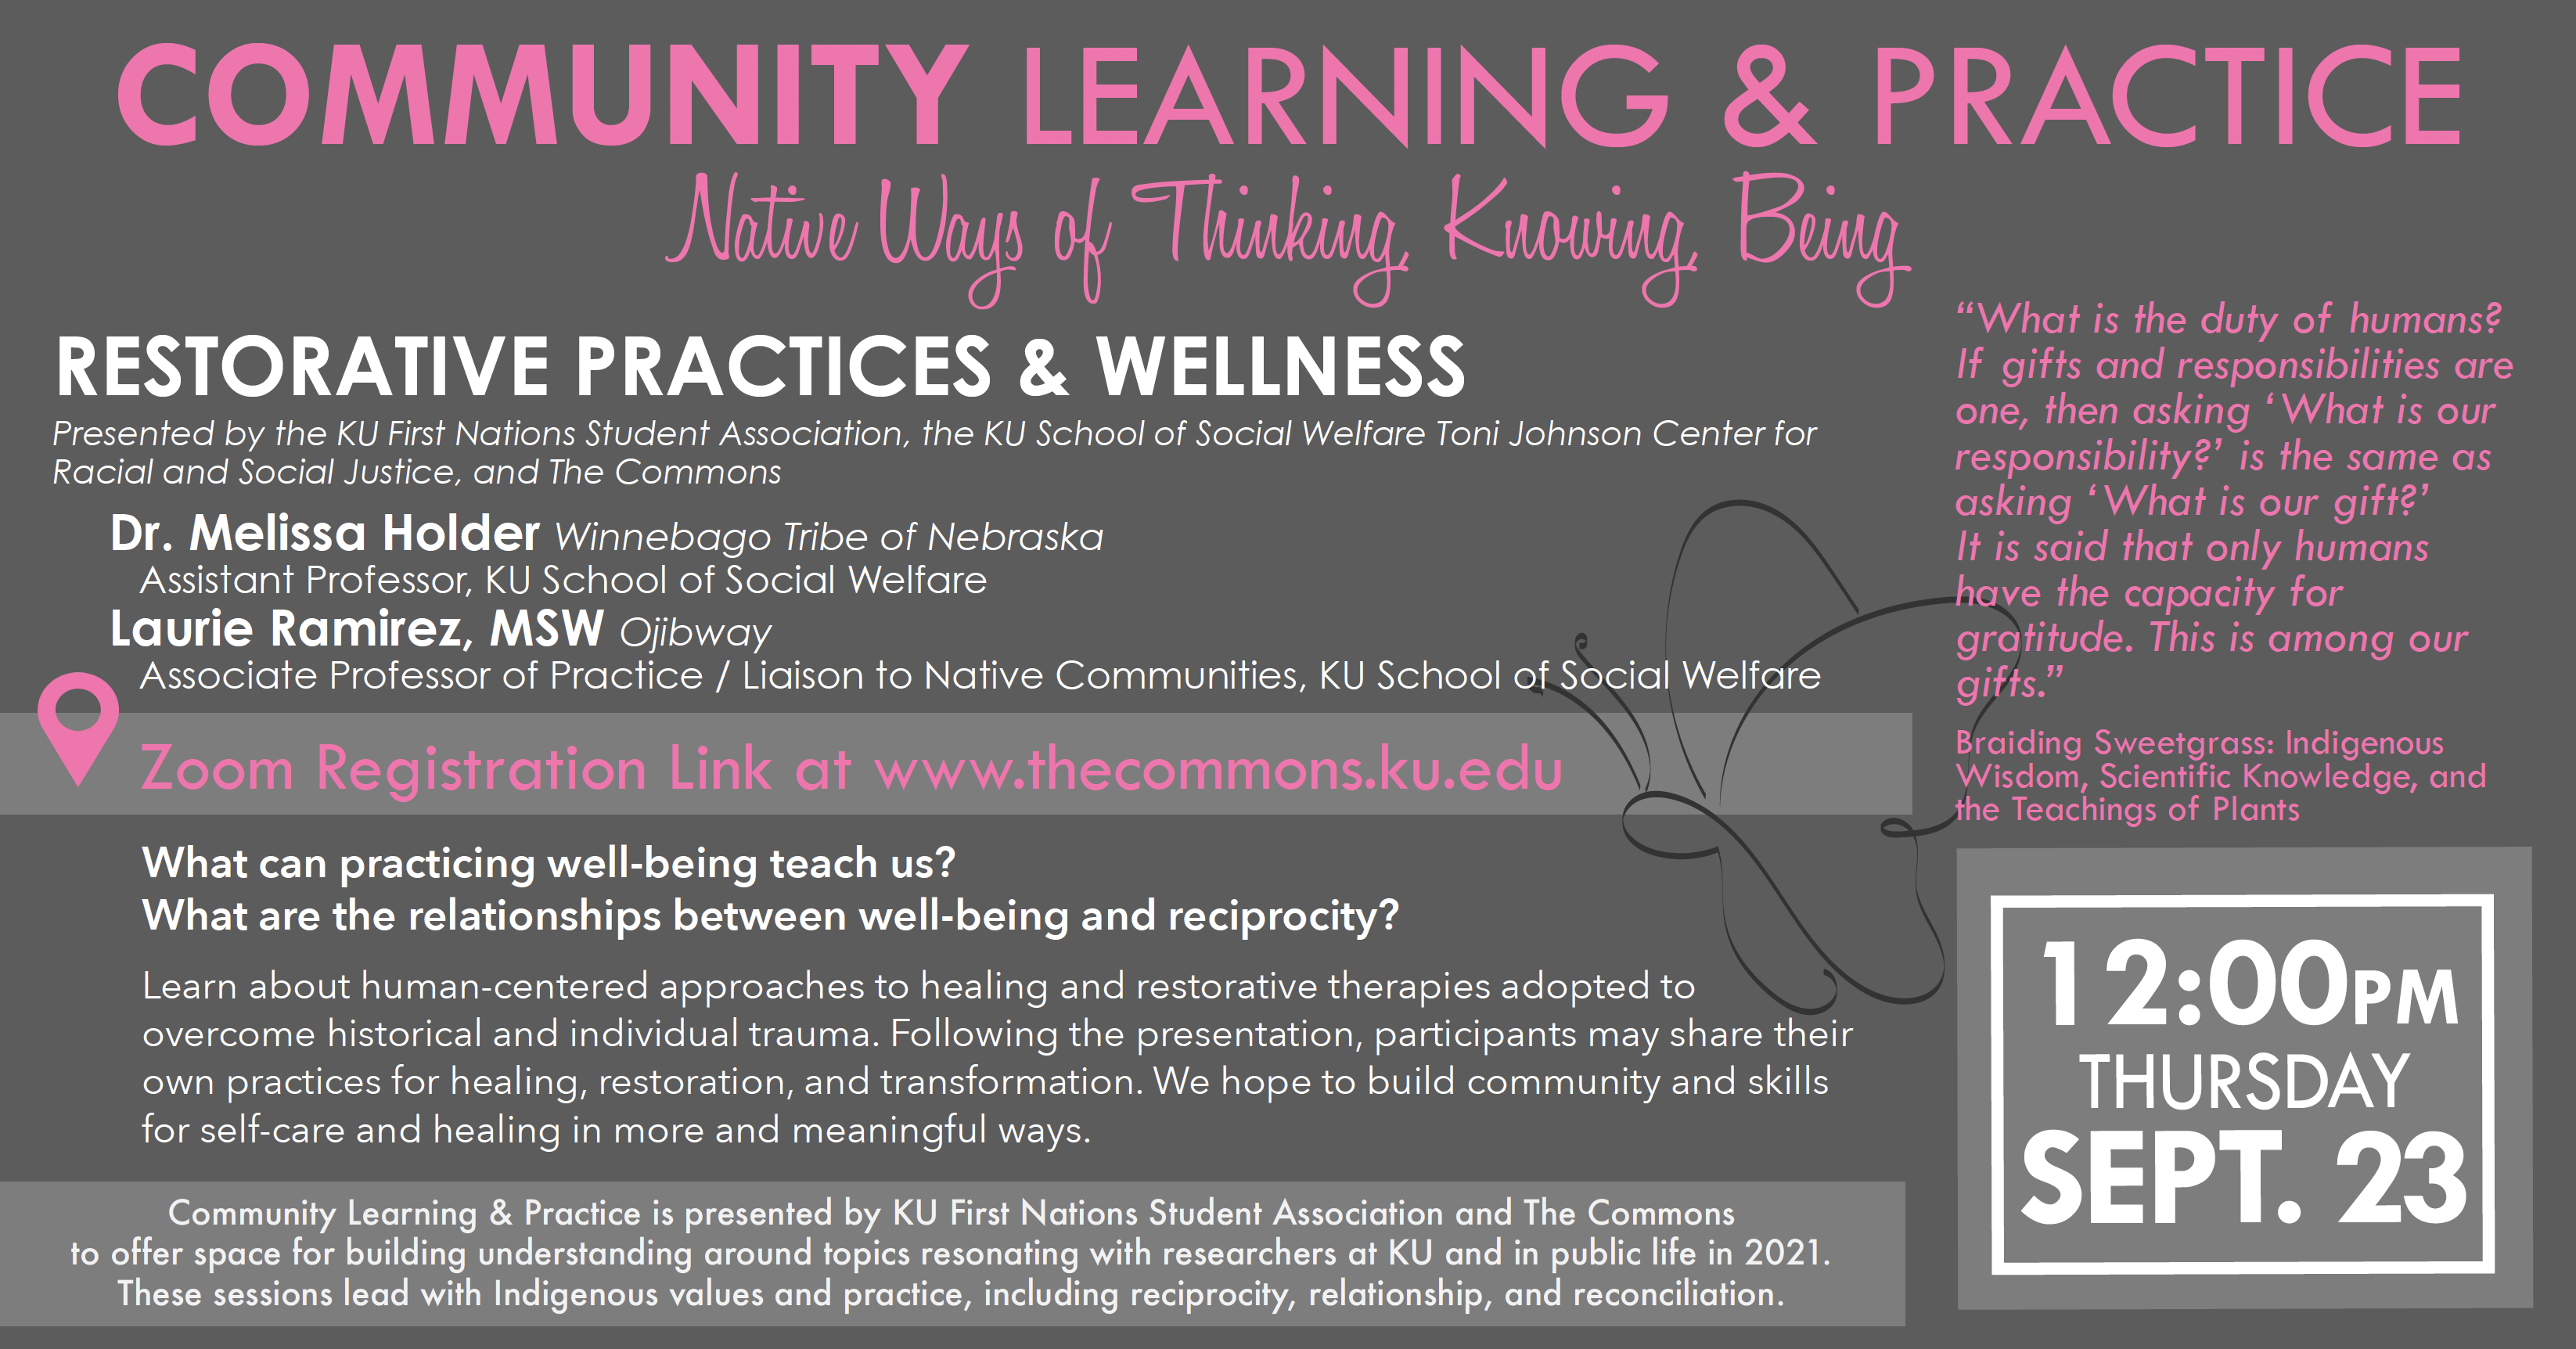 "Community Learning & Practice: Native Ways of Thinking, Knowing, Being. Restorative Practices & Wellness with Dr. Melissa Holder and Professor Laurie Ramirez. Register for this Zoom session at www.thecommons.ku.edu on Thursday, Sept. 23 at 12:00pm"